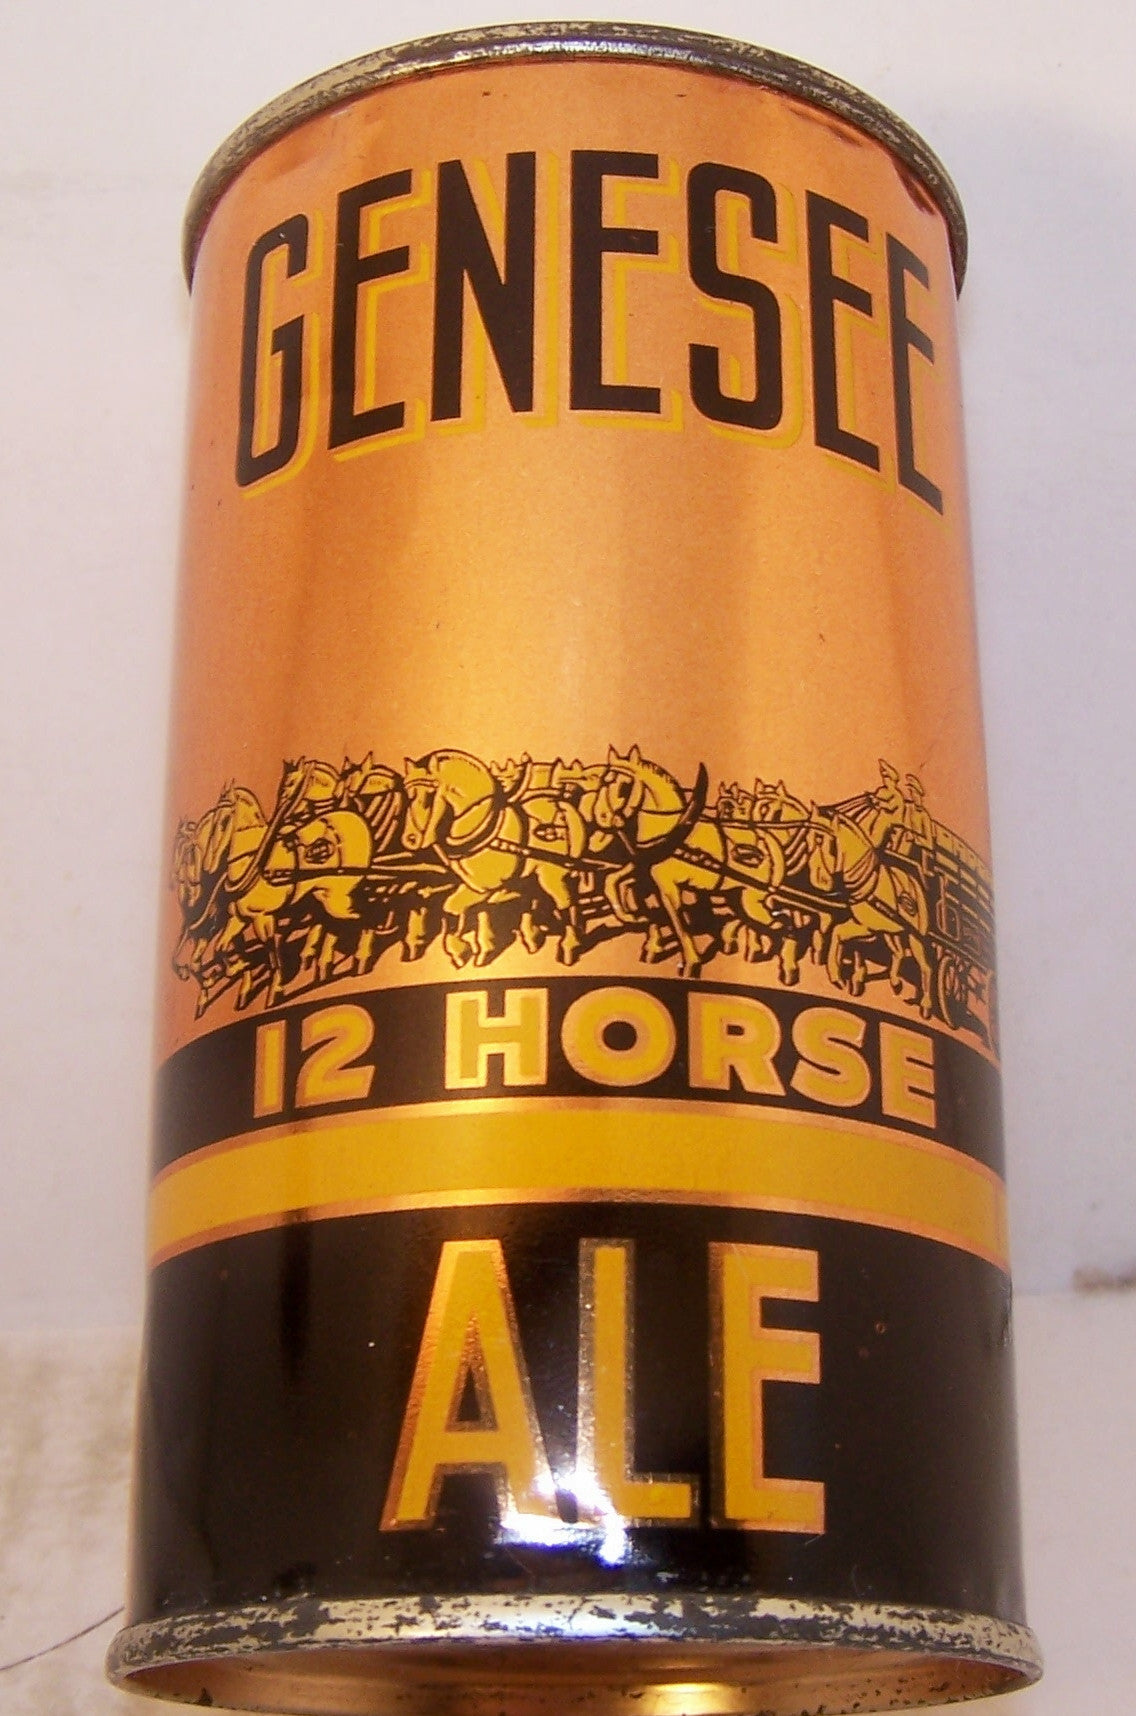 Genesee 12 Horse Ale, Lilek page # not in book, Grade 1/1+ Sold 12/20/14